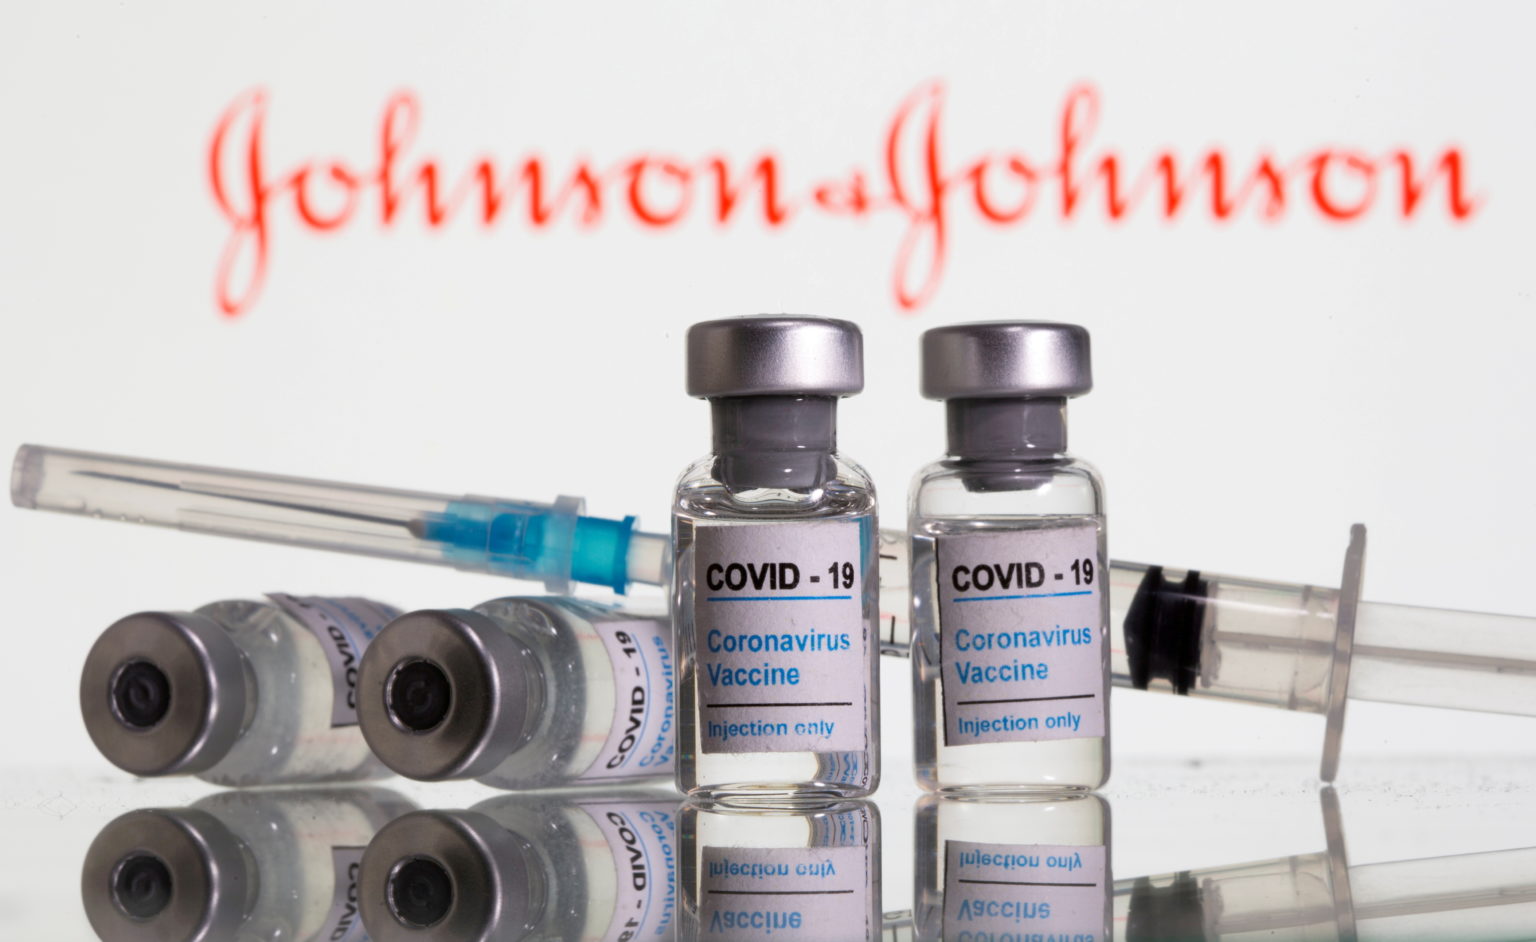 FILE PHOTO: Vials labeled “COVID-19 Coronavirus Vaccine” and syringe are seen in front of displayed Johnson&Johnson logo in this illustration taken, February 9, 2021. REUTERS/Dado Ruvic/Illustration